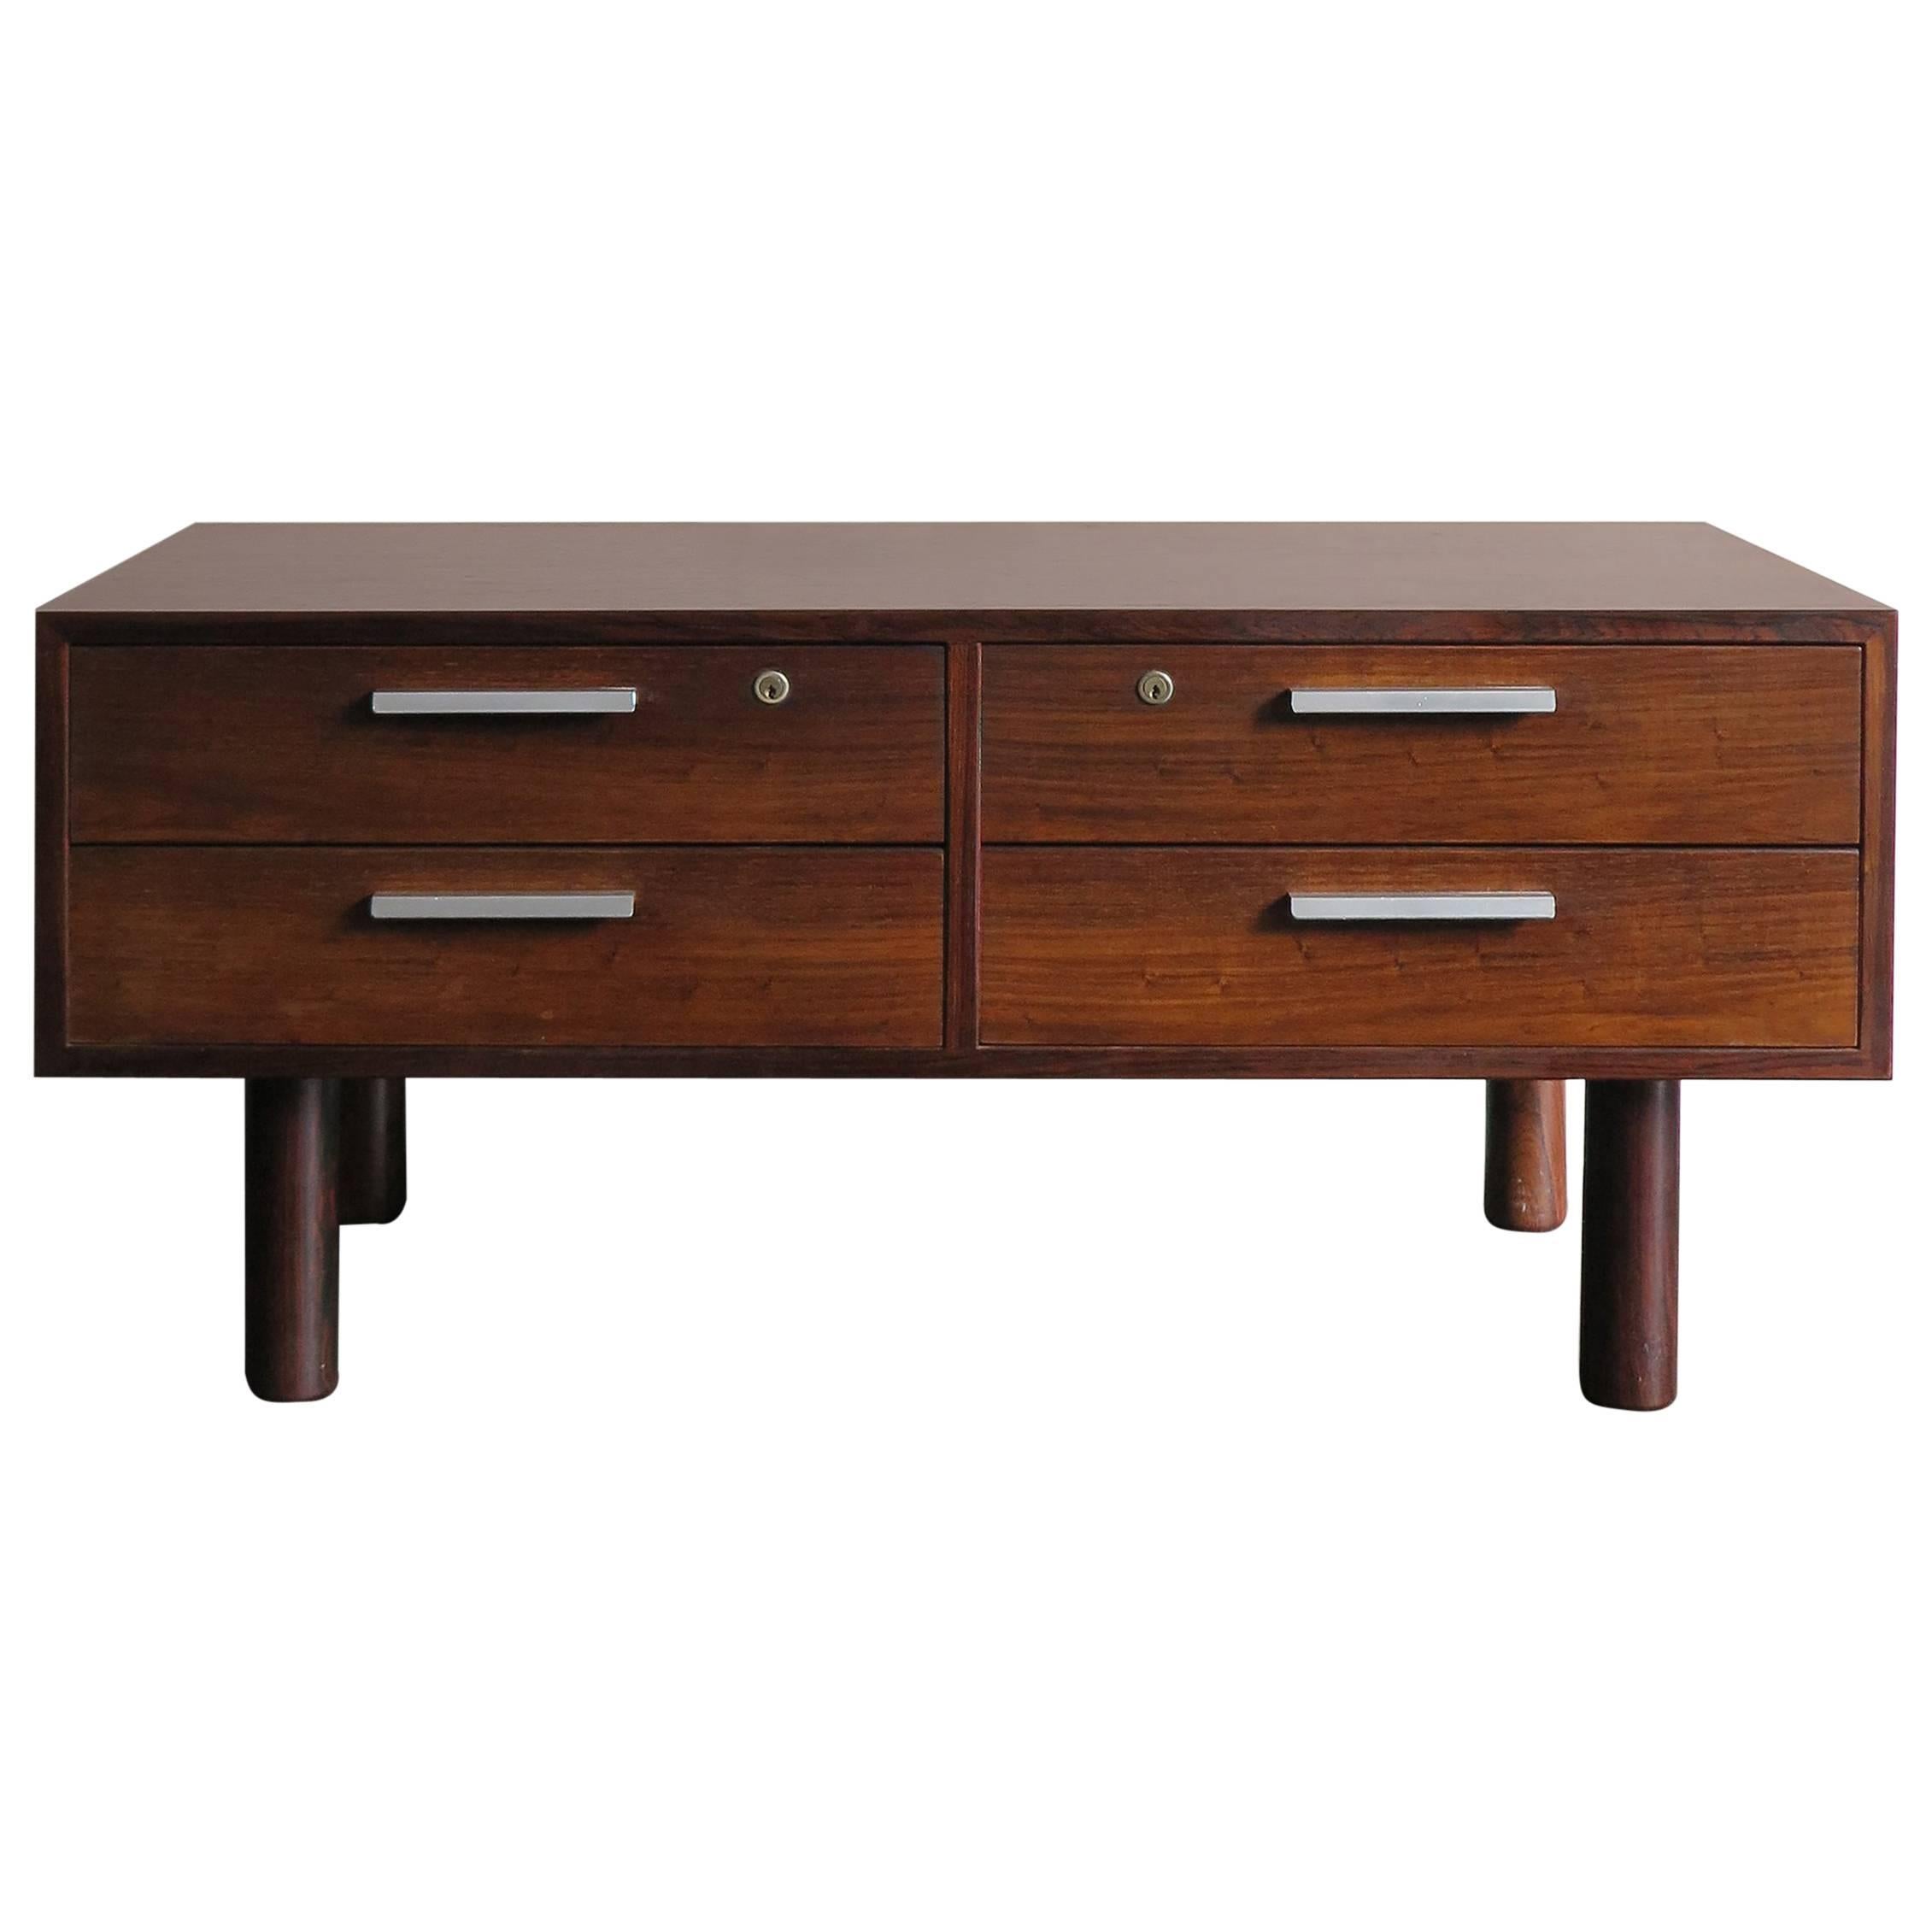 1960s Danish and Scandinavian Design Rosewood Chest of Drawers